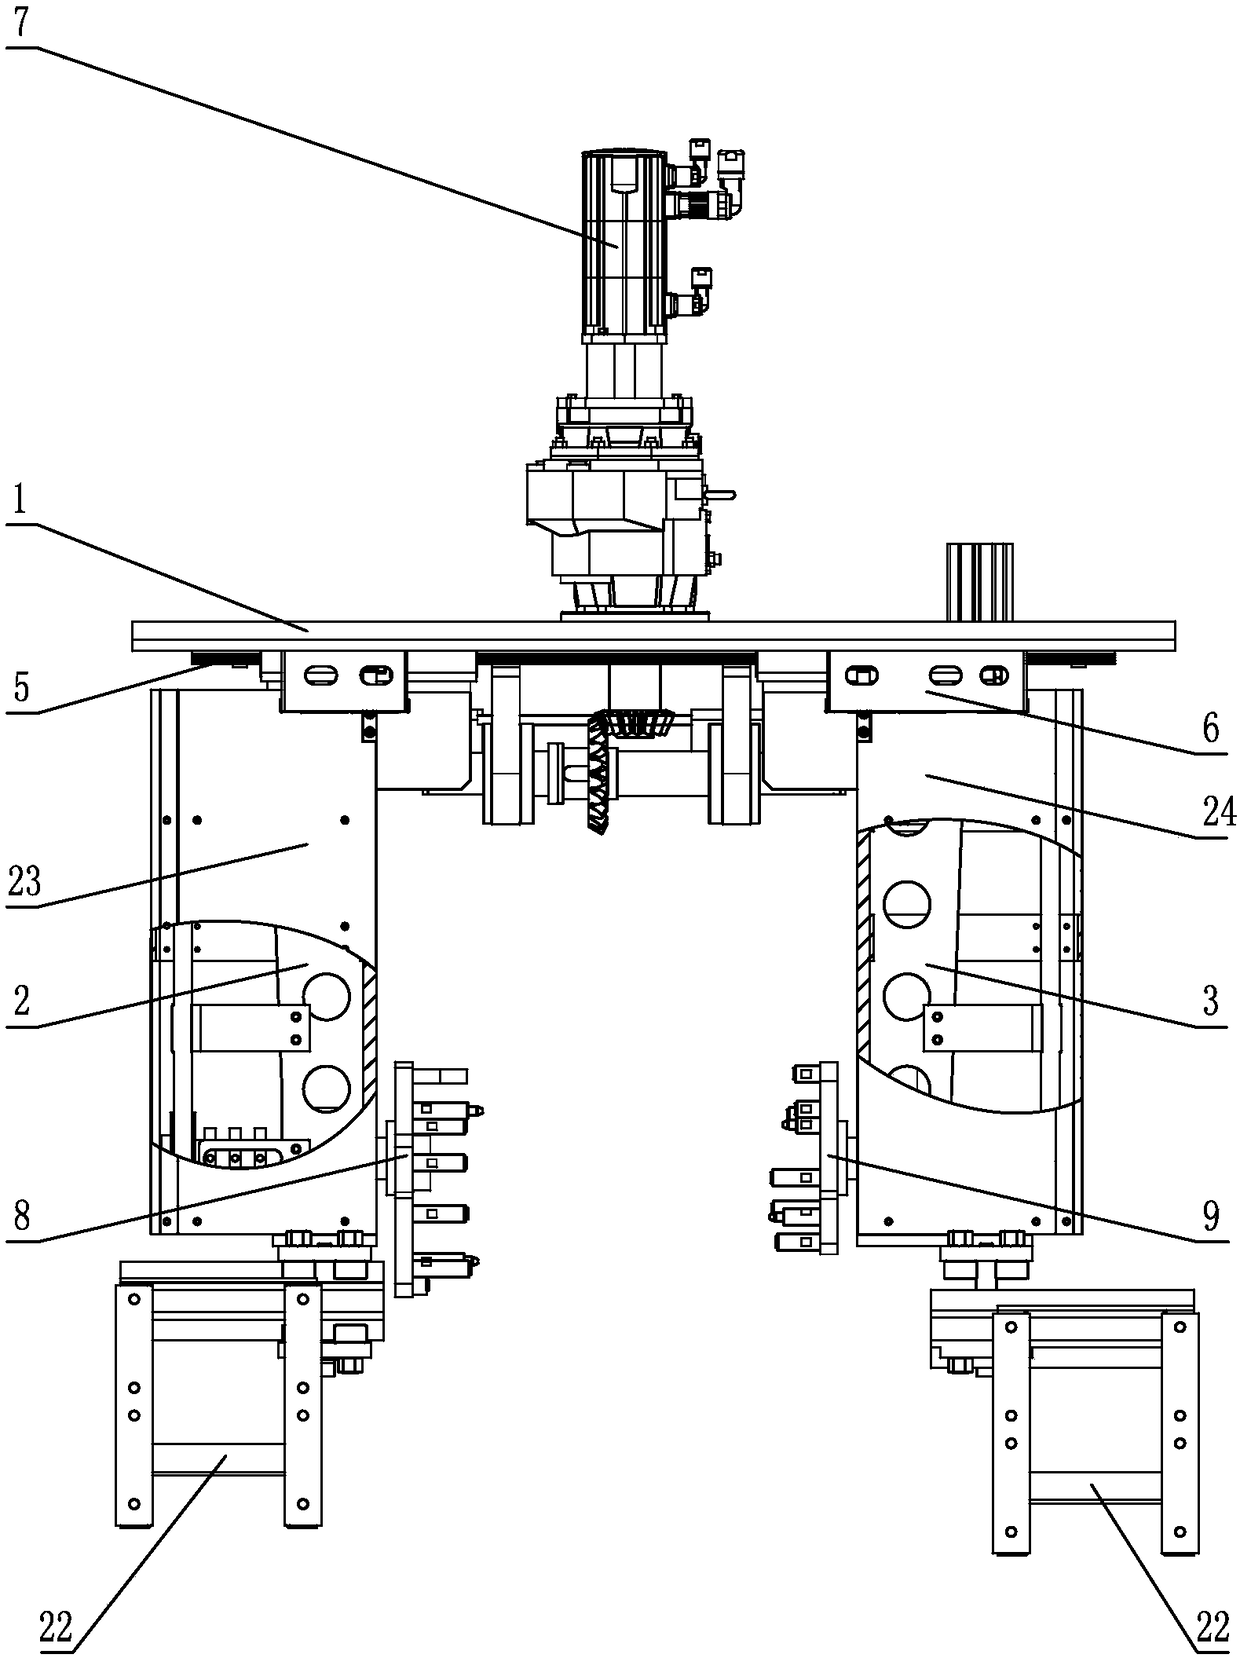 Multi-machine compatible side-mounted clamping and turnover mechanism